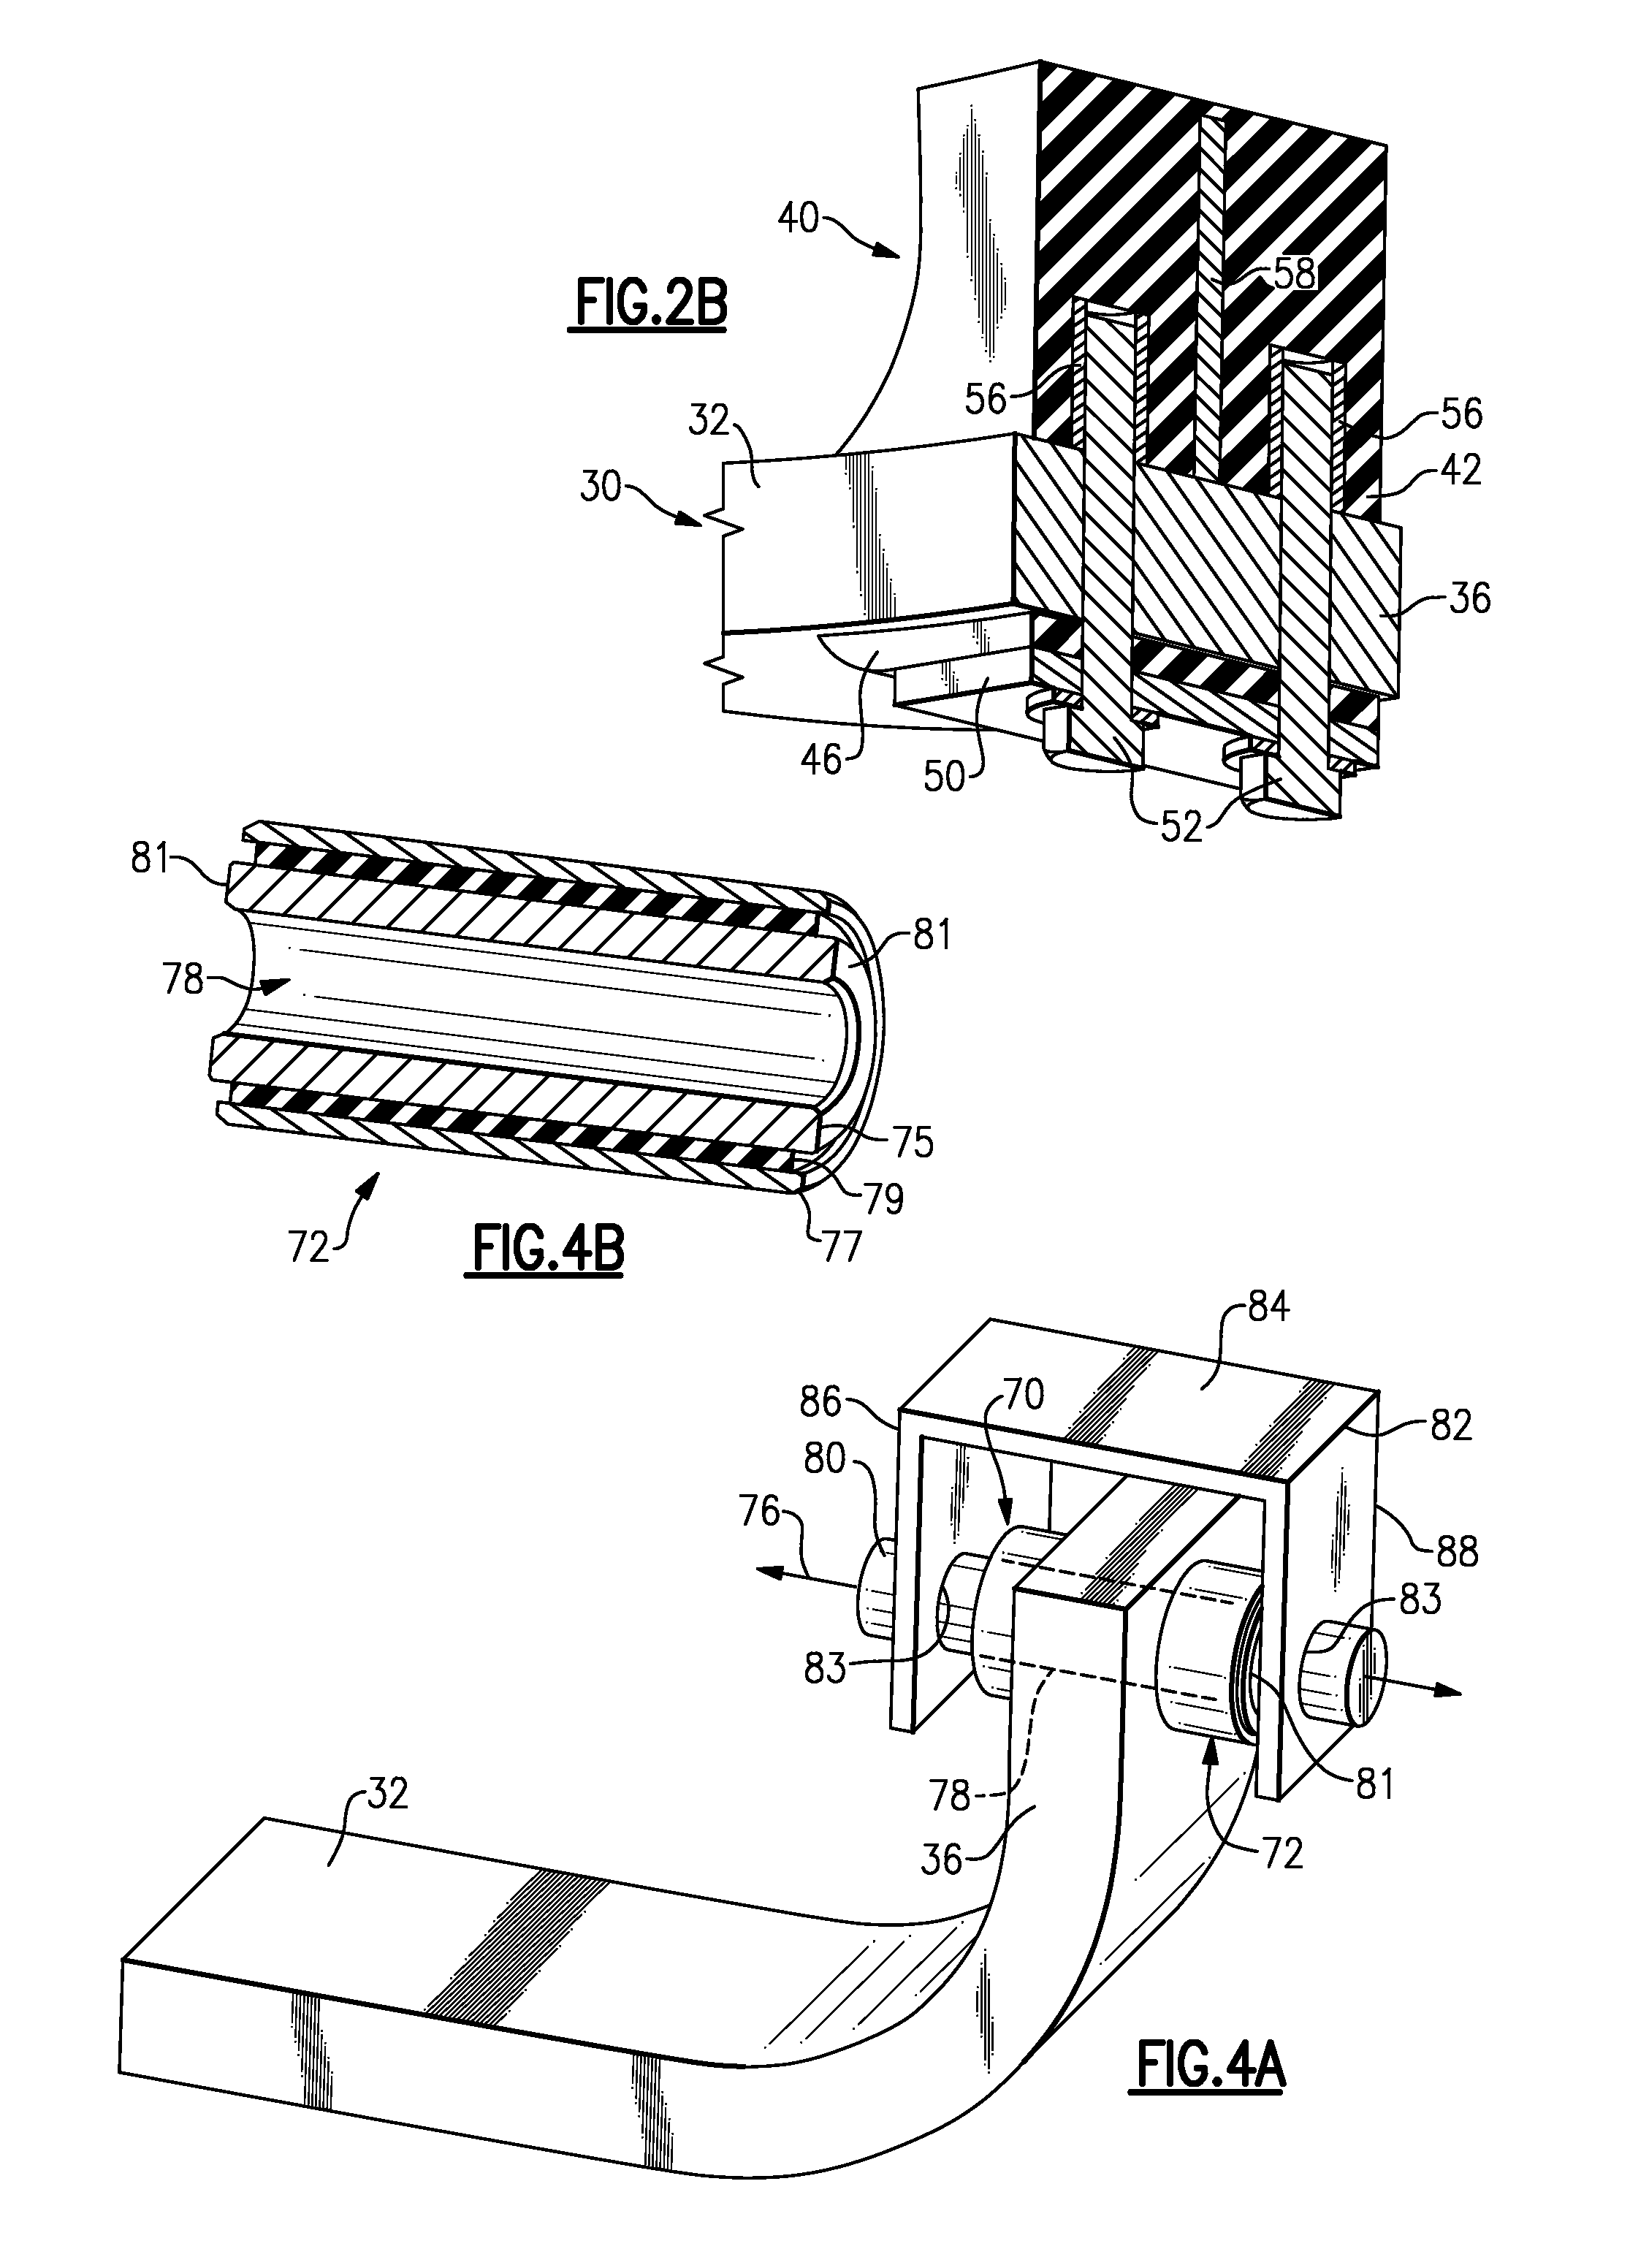 Composite spring with resilient attachment interface